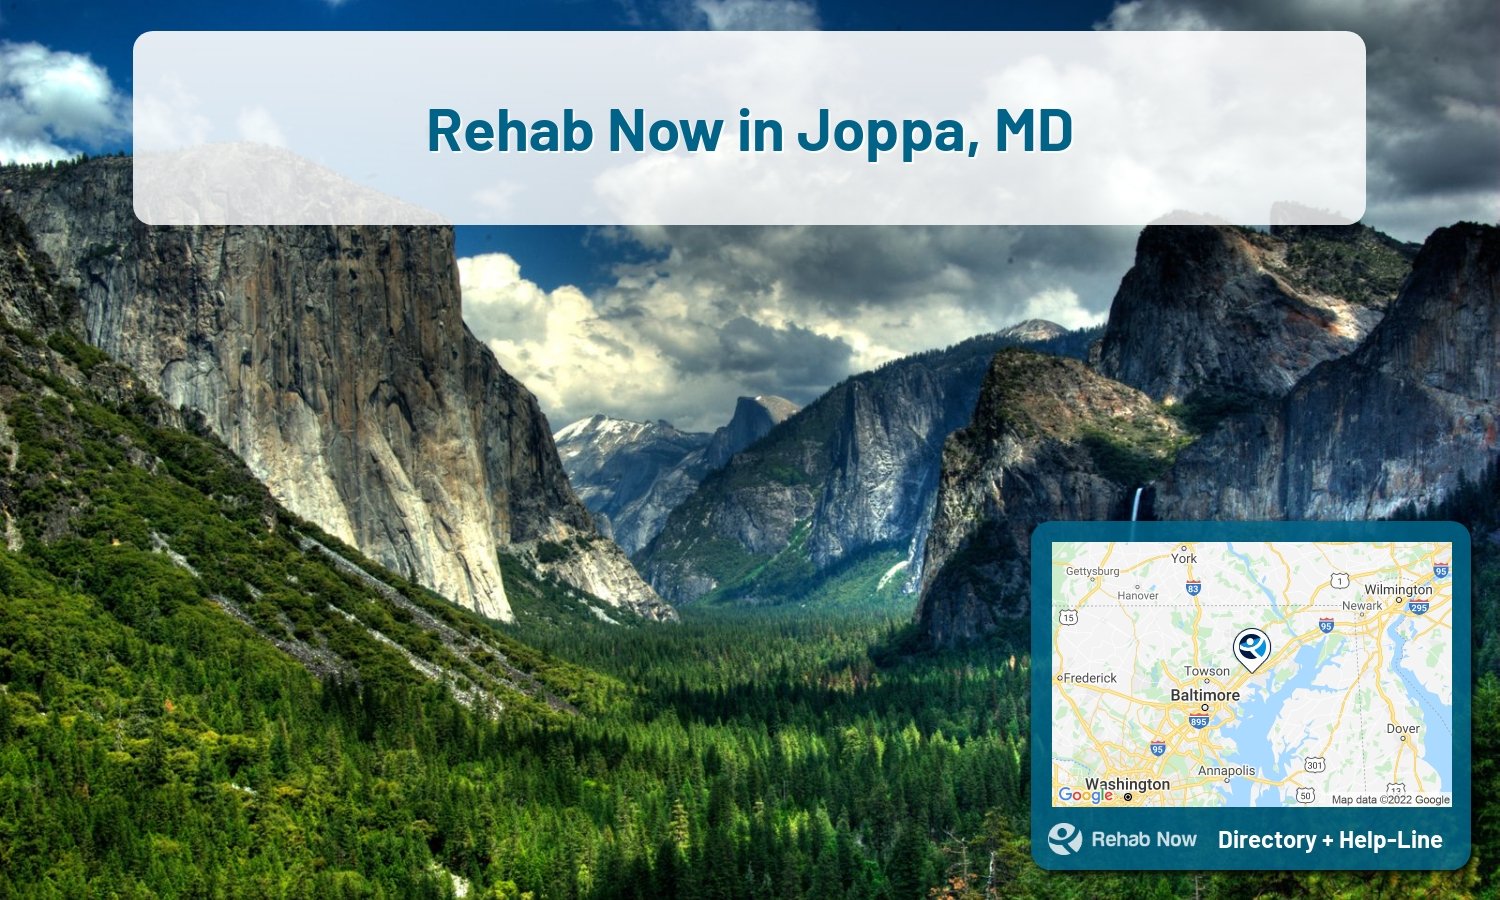 Joppa, MD Treatment Centers. Find drug rehab in Joppa, Maryland, or detox and treatment programs. Get the right help now!